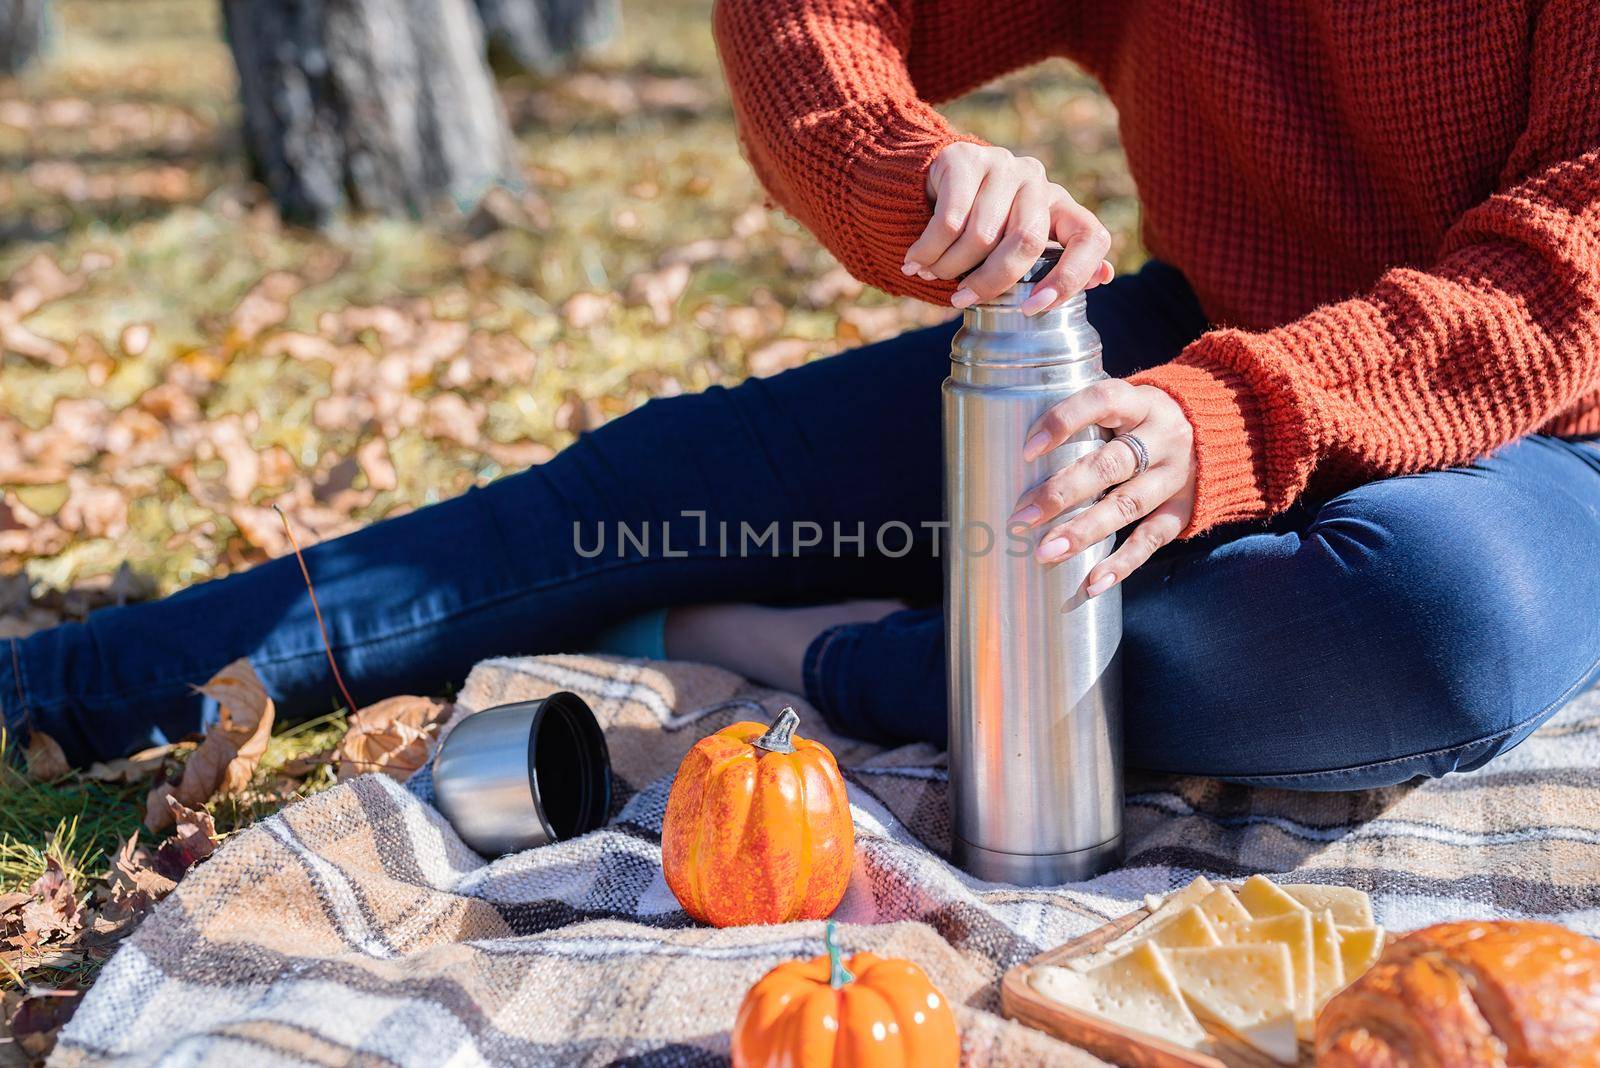 Leisure, free time. Beautiful caucasian woman in red sweater on a picnic outdoors, sitting on a plaid in autumn forest